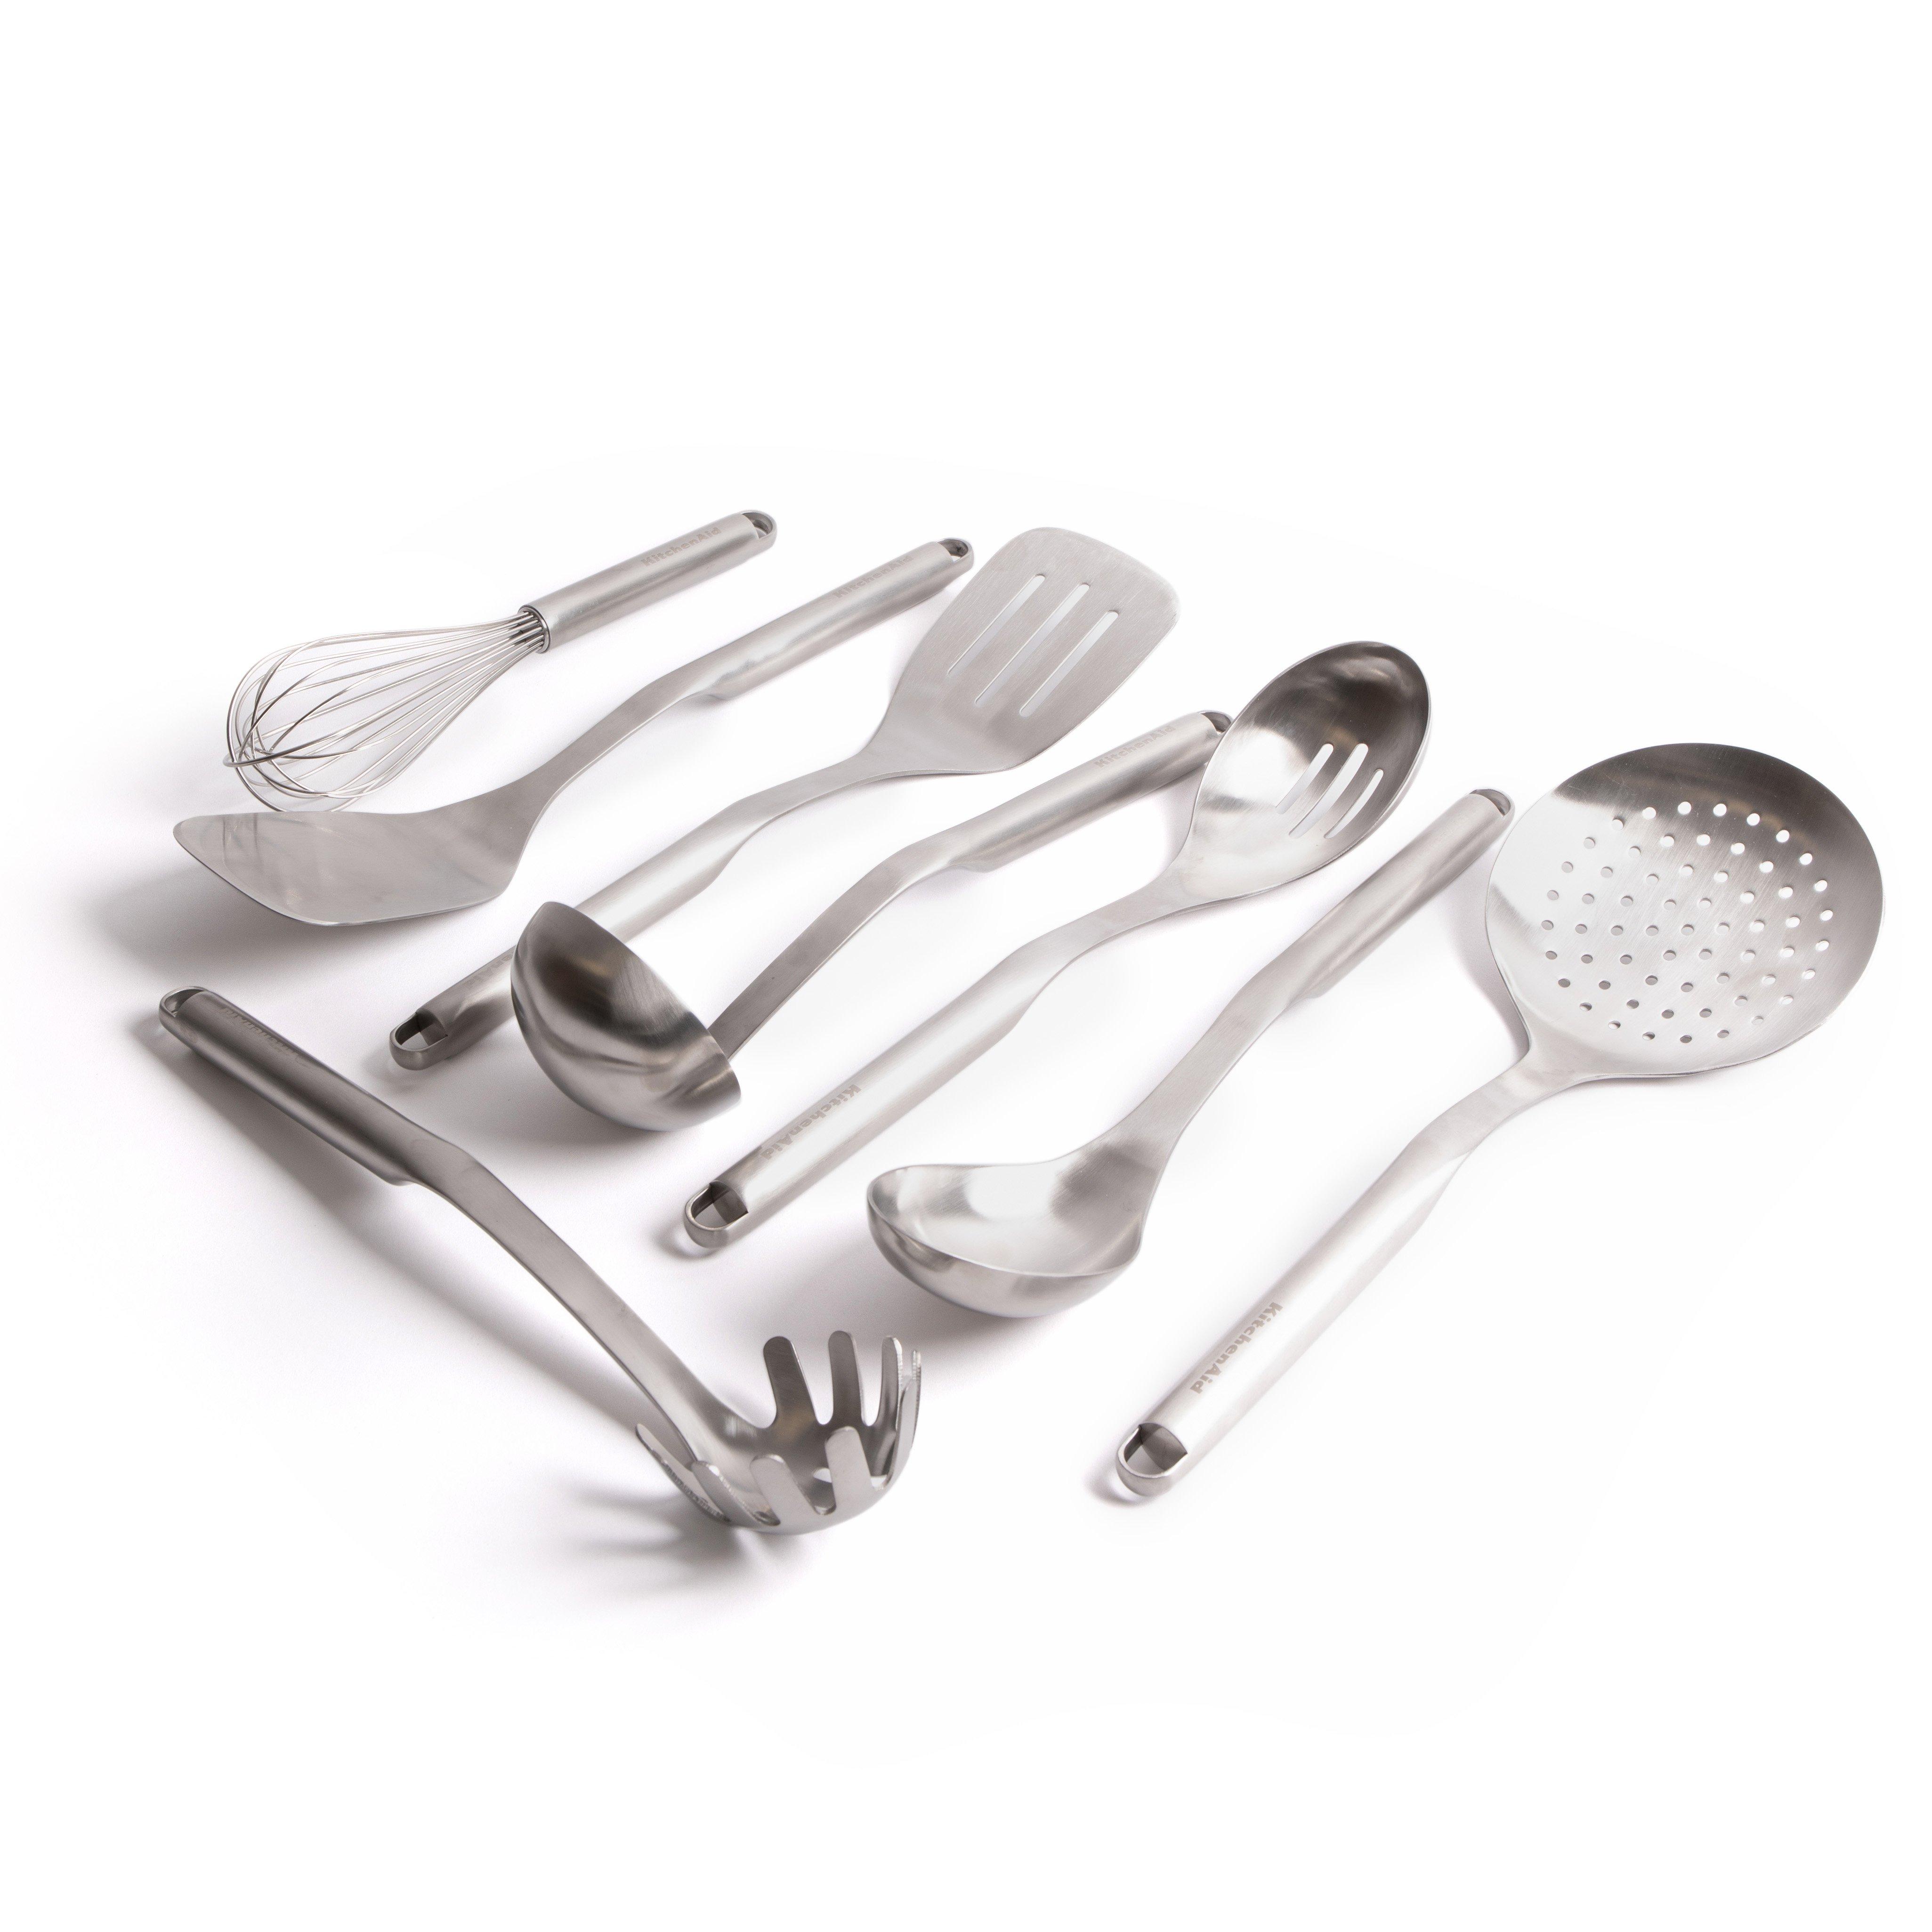 8pc Stainless Steel Utensil Set with Slotted Spoon, Turner, Cooking Spoon, Ladle, Pasta Server, Stra